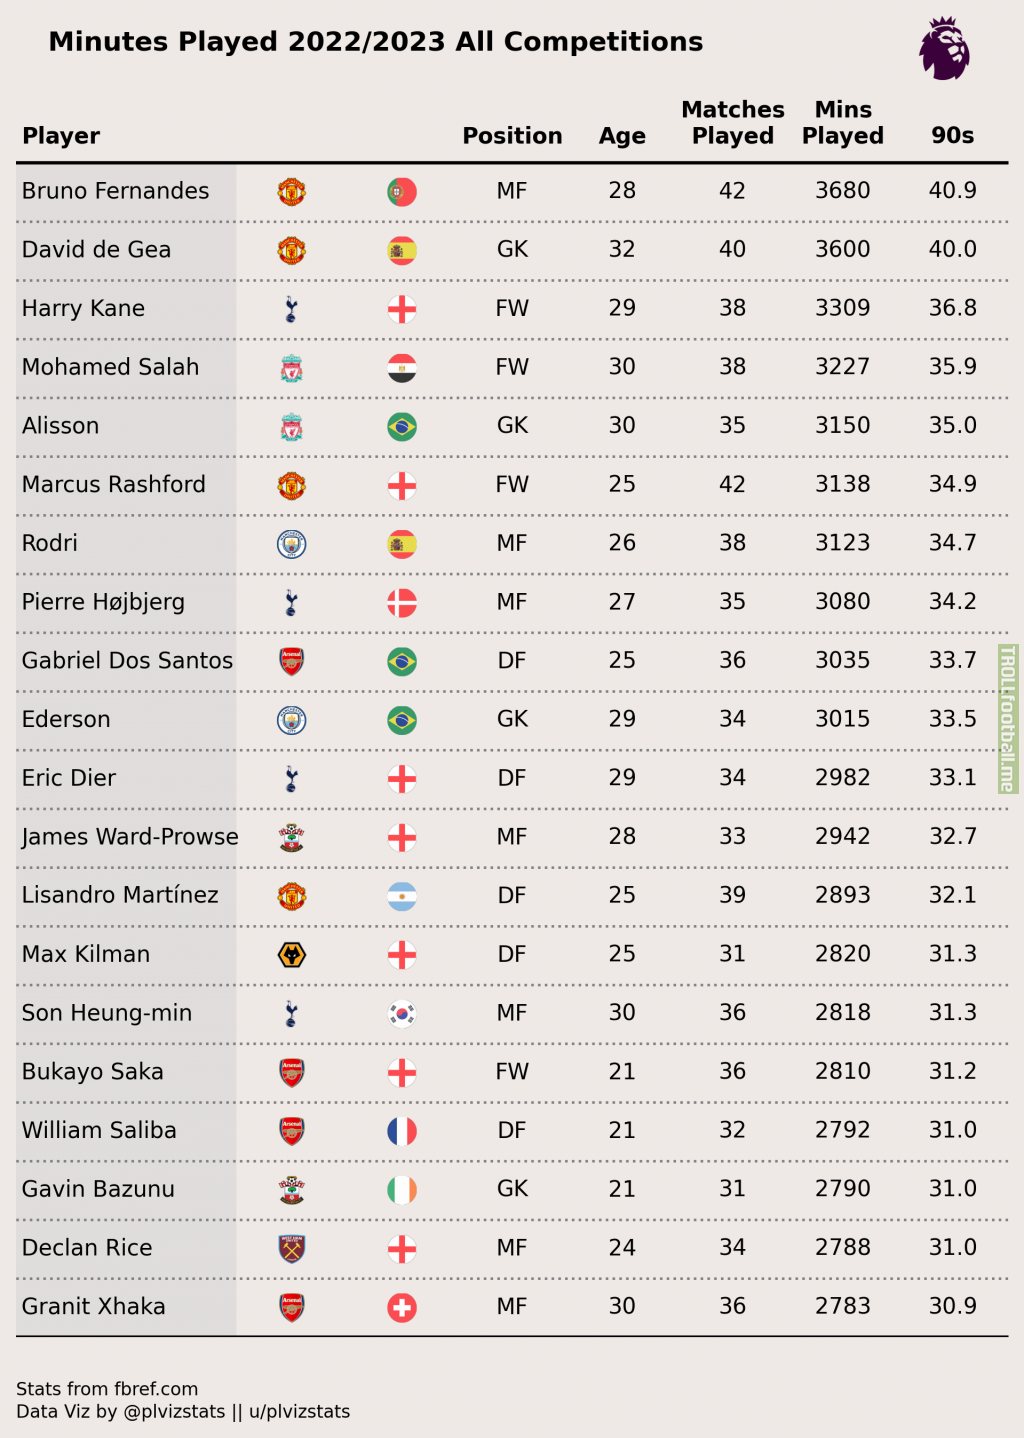 Premier League players to have played the most minutes in all competitions 22/23